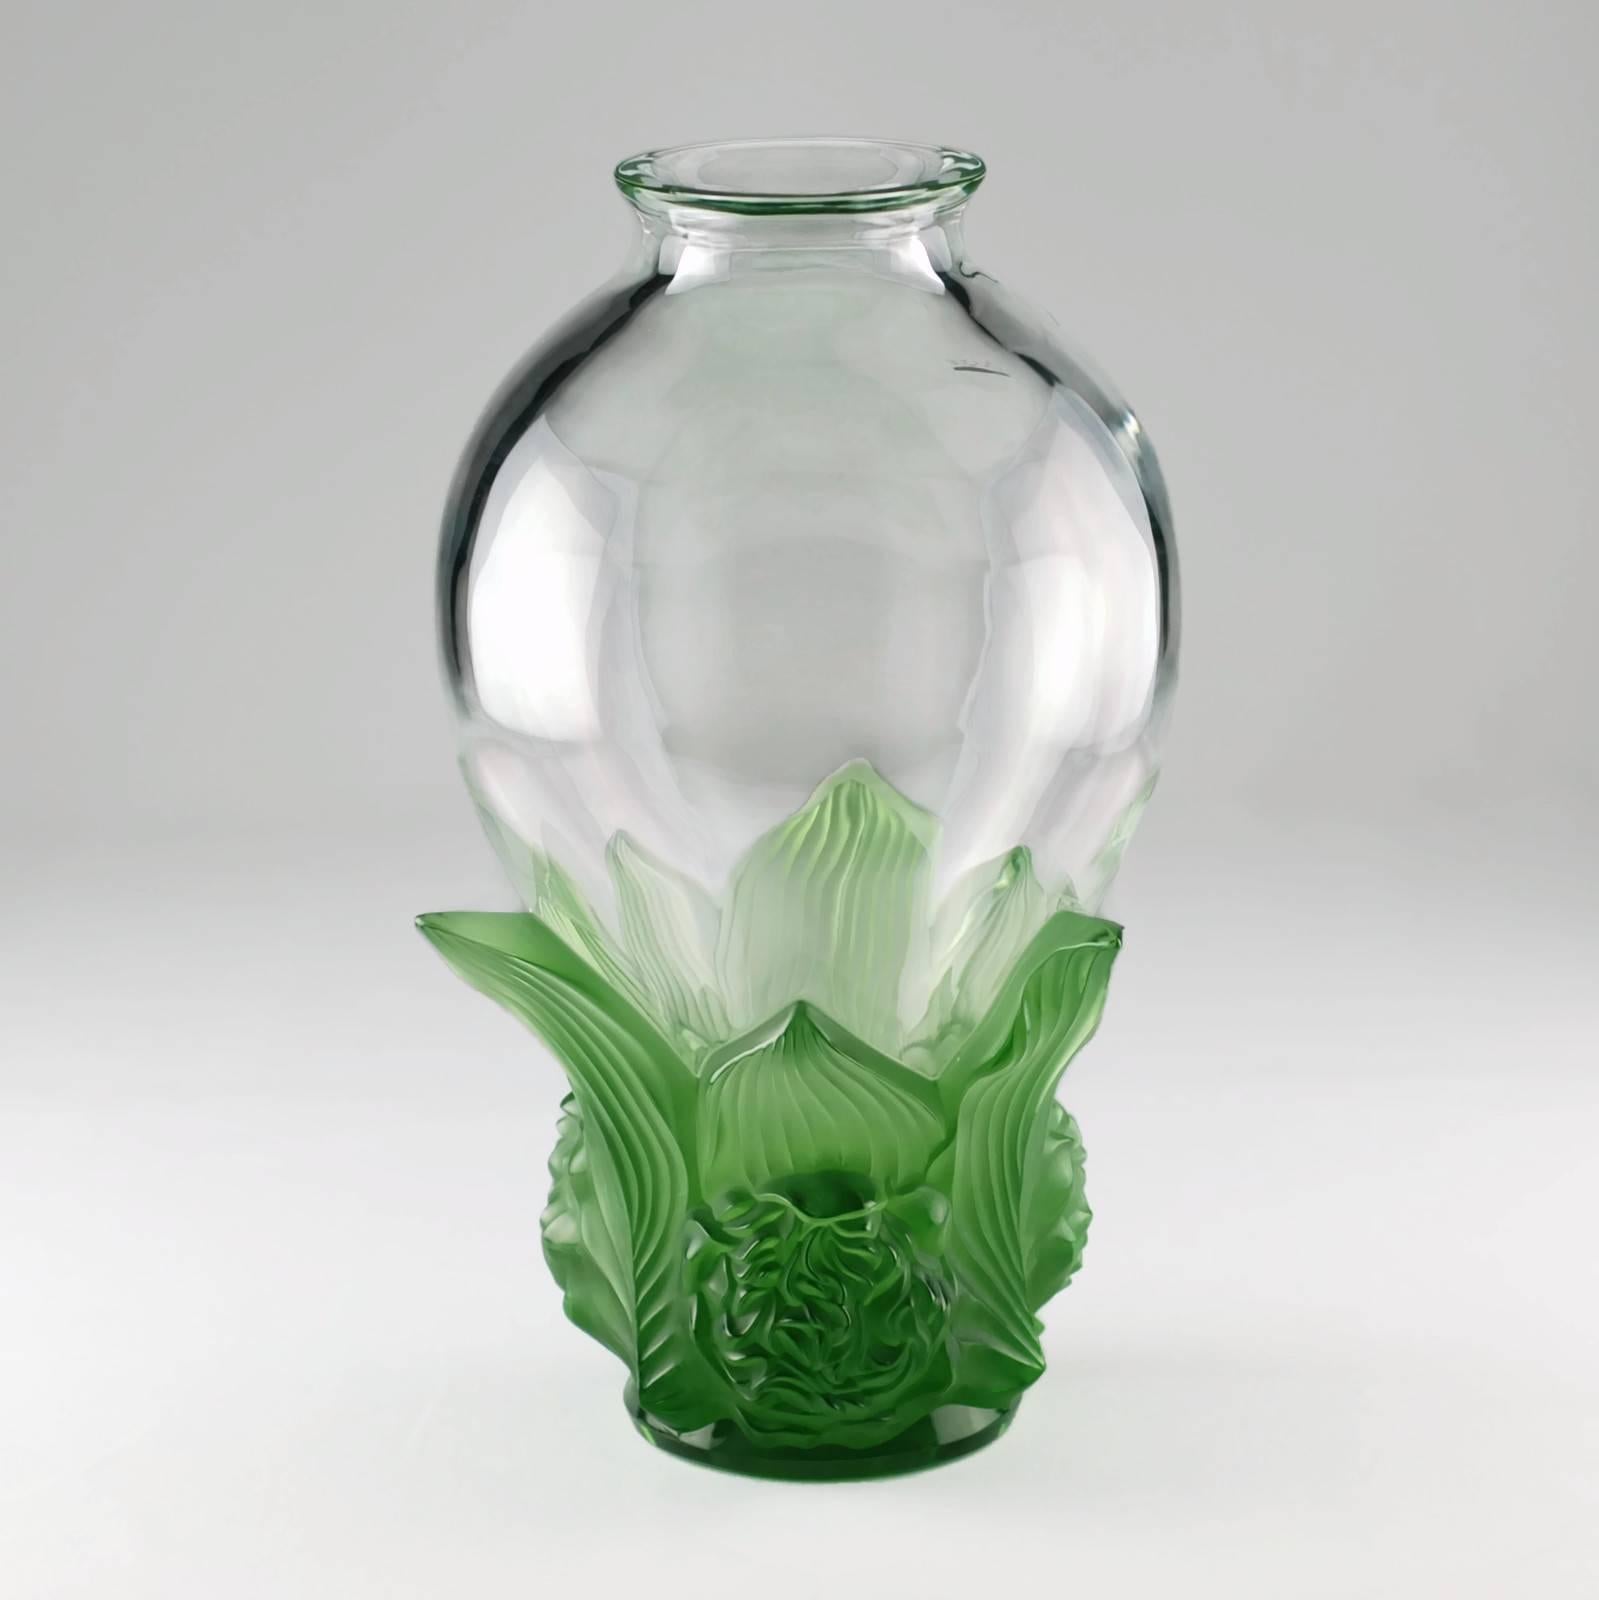 This signed and numbered limited edition Lalique vase is titled vase Pivoines and features a foliate and floral motif at the base which has been executed in jade green satin-finished crystal. The ornate decoration gives way to a clear crystal body